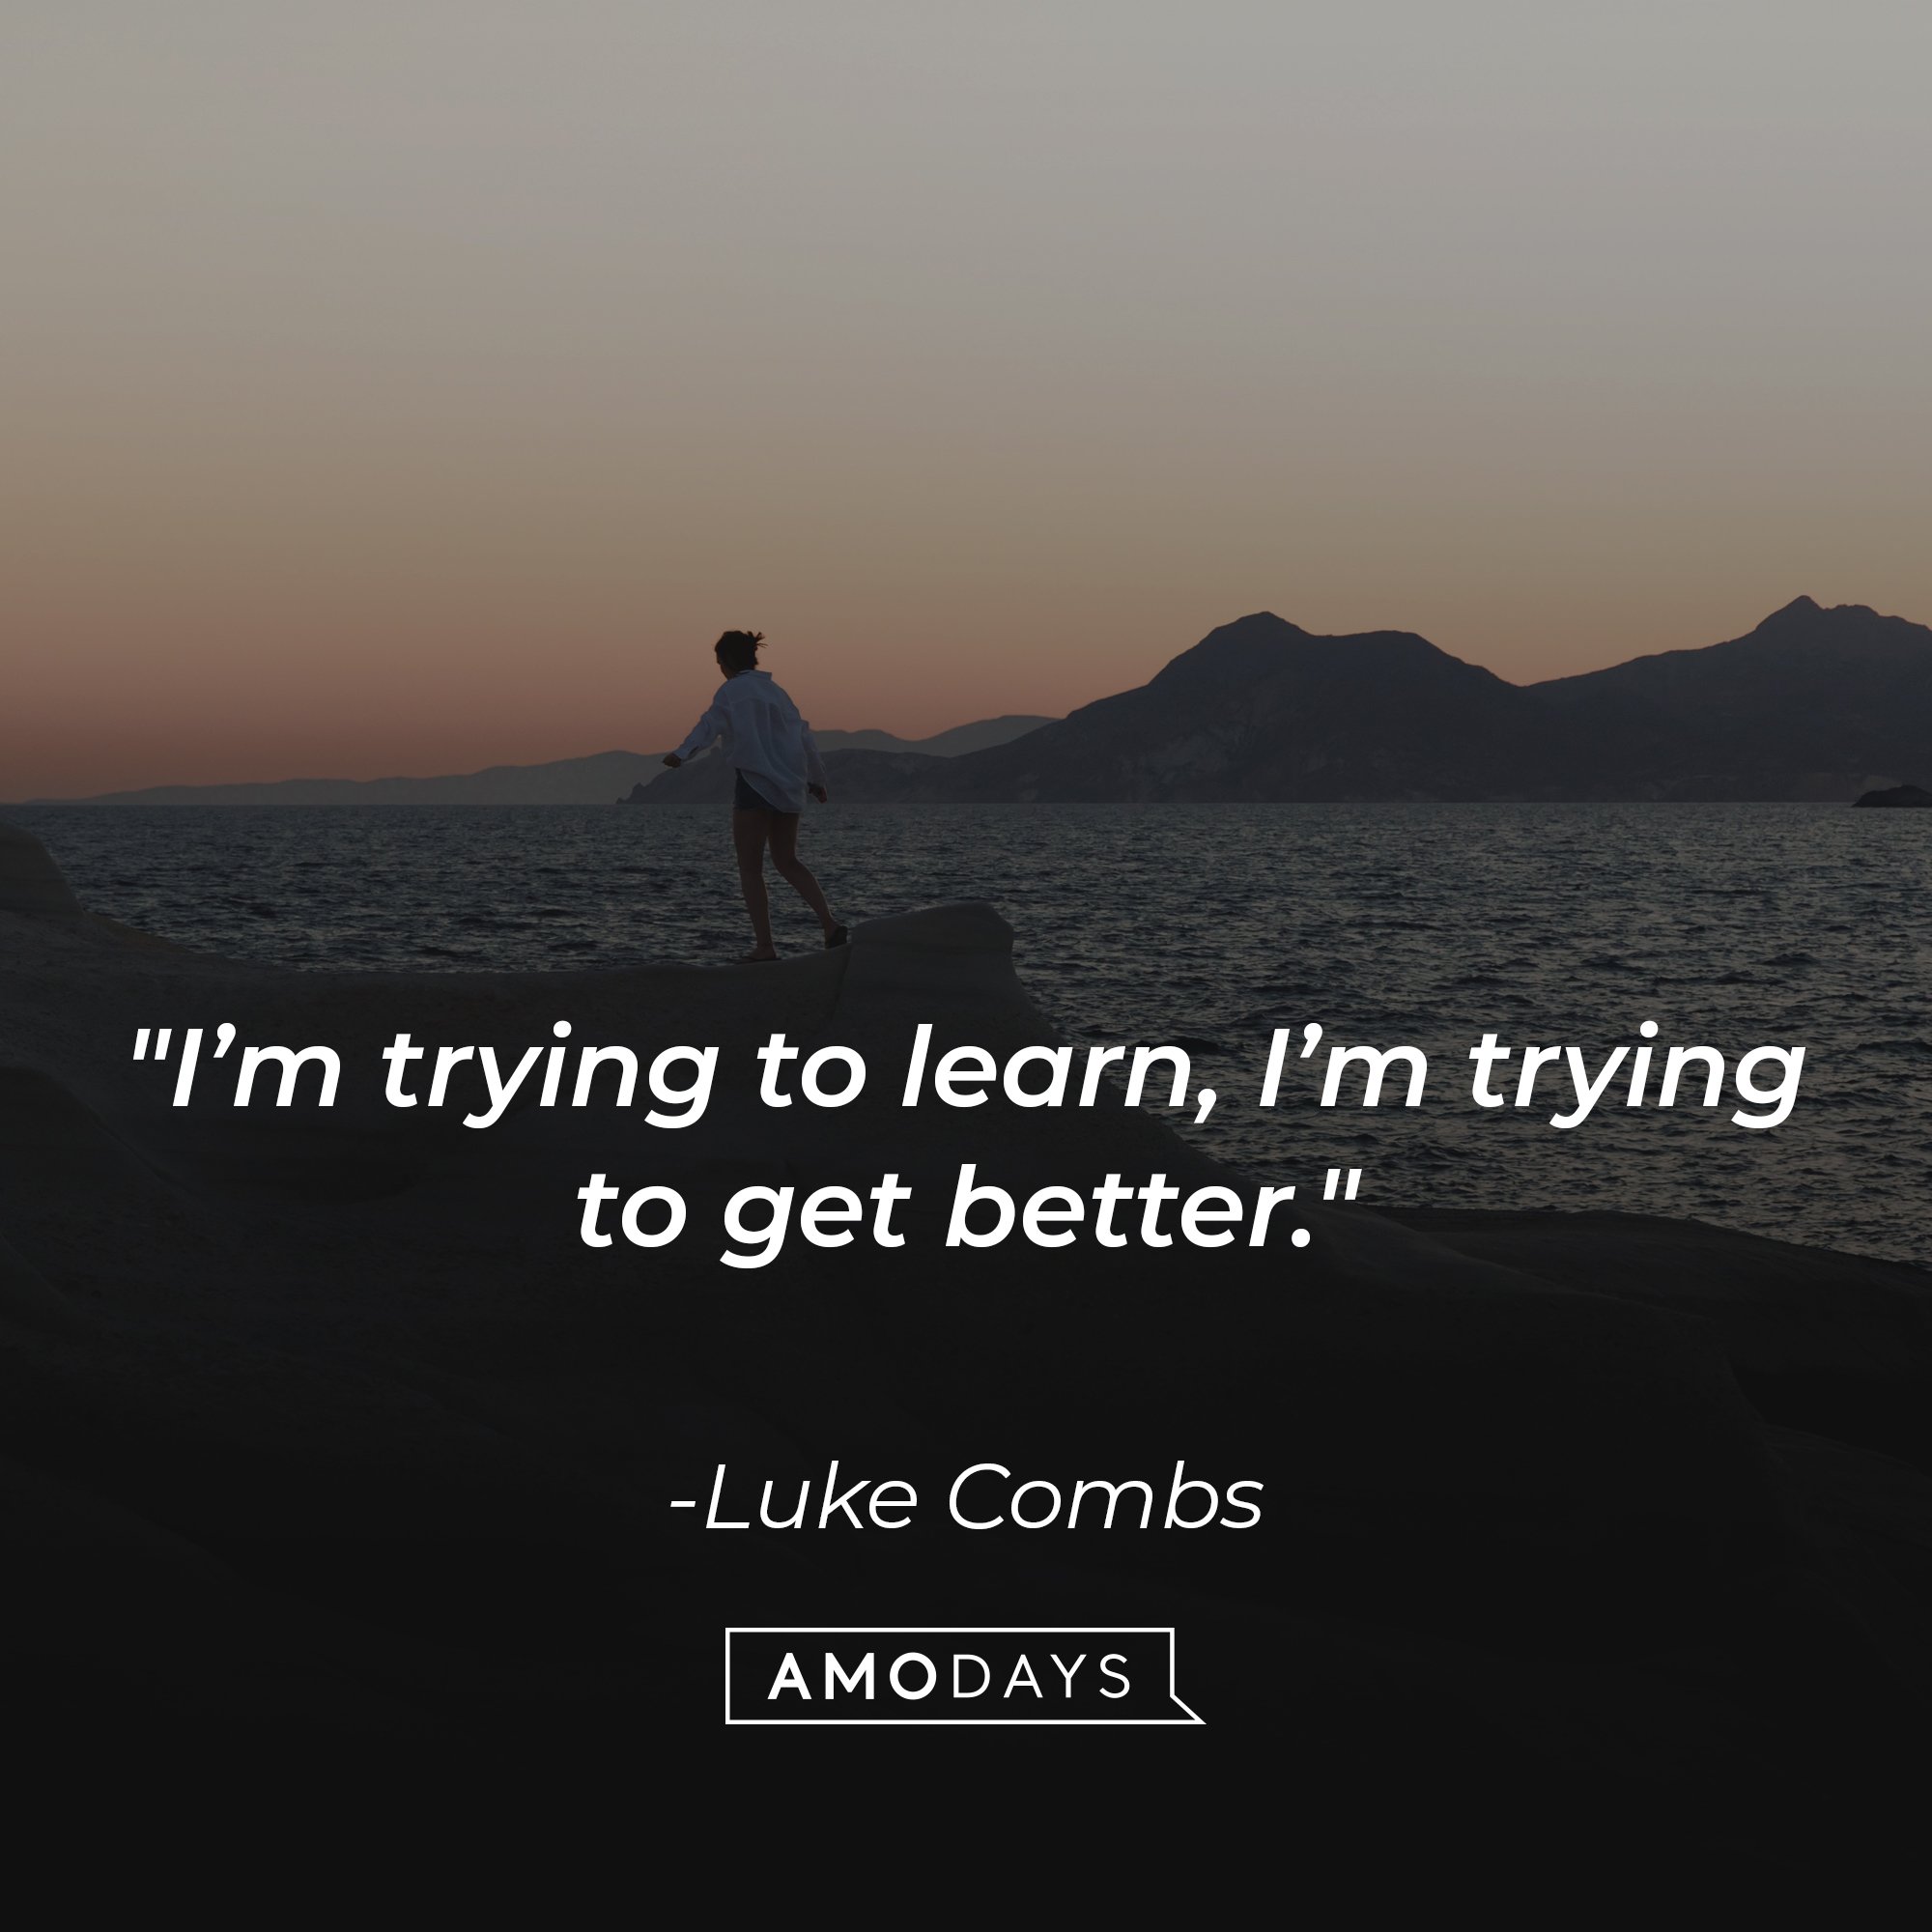 Luke Combs's quote "I’m trying to learn, I’m trying to get better." | Source: Unsplash.com